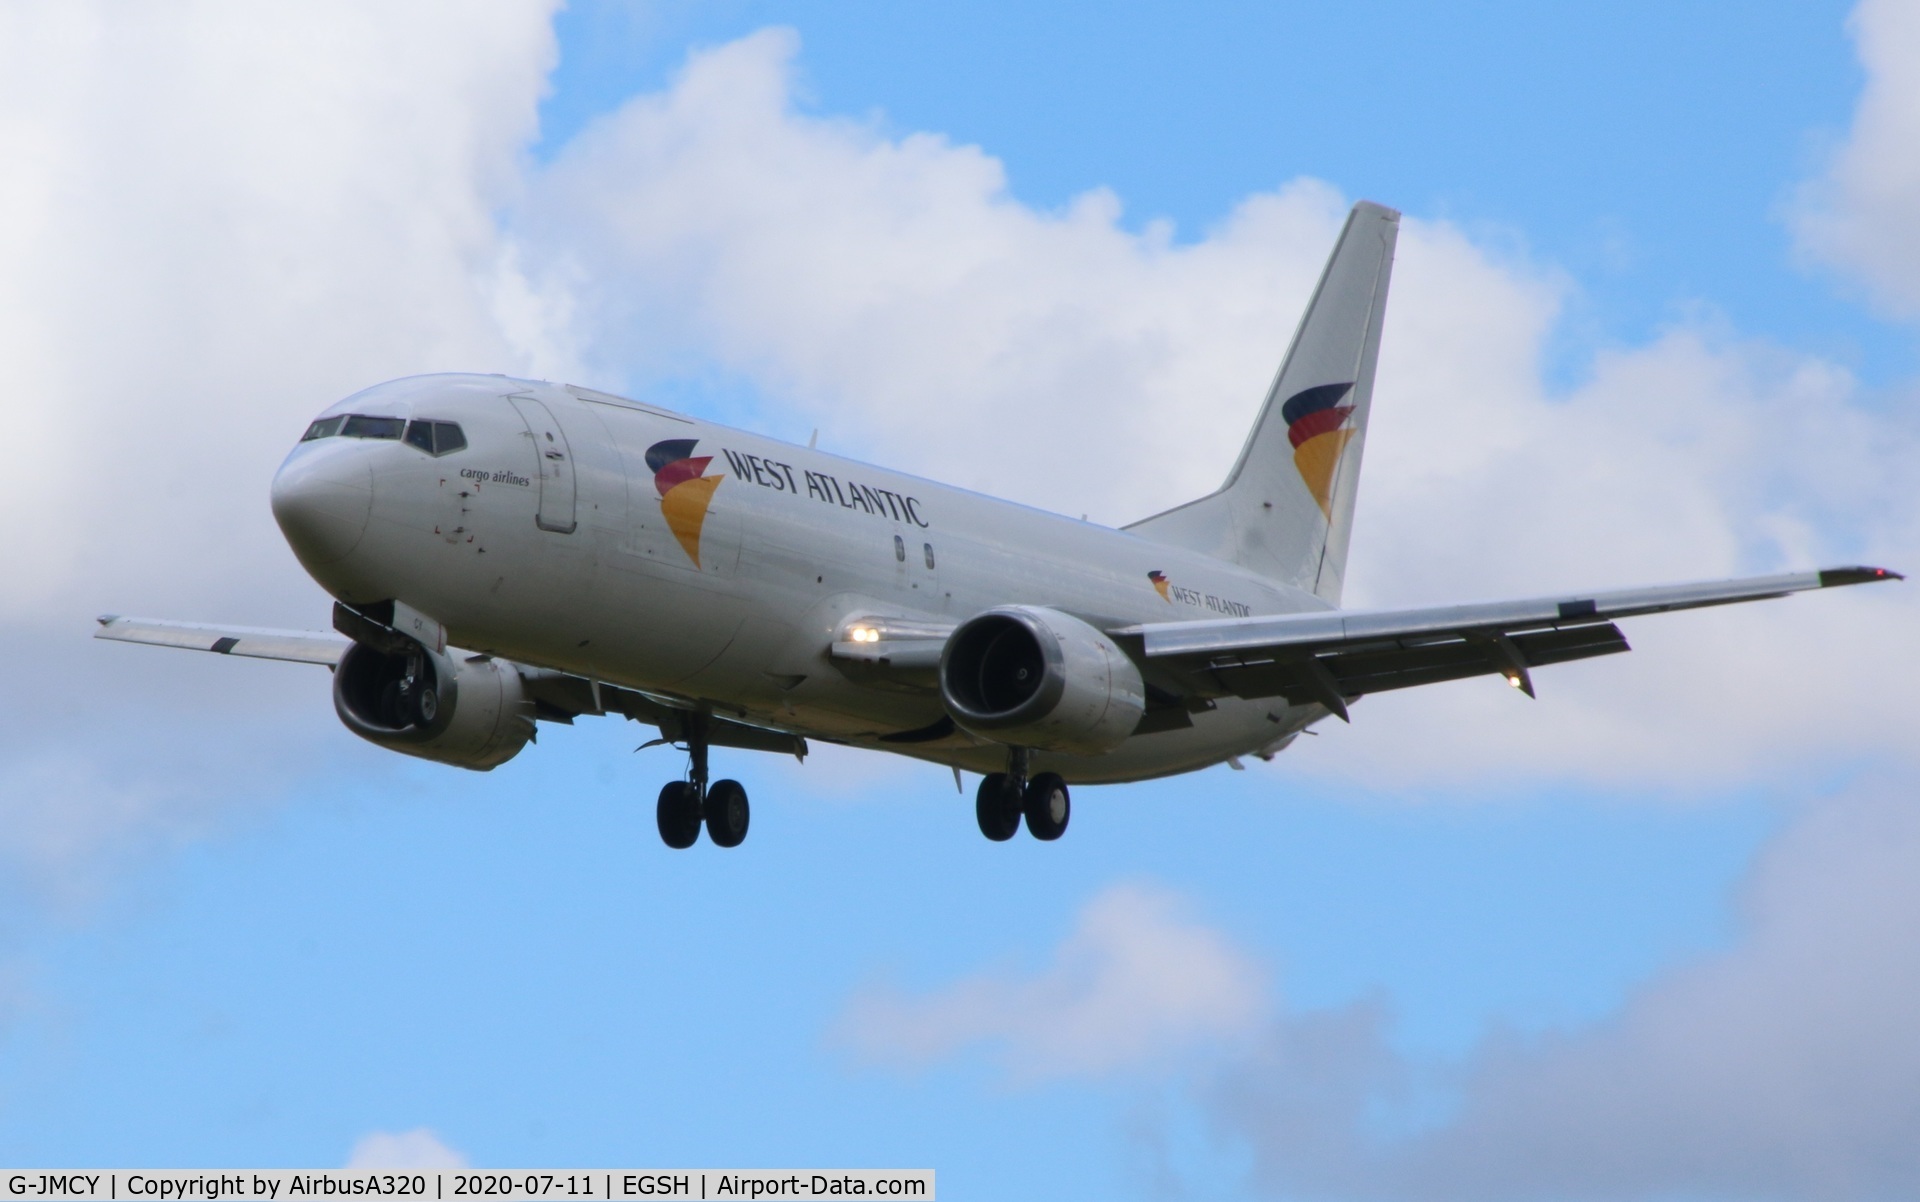 G-JMCY, 1994 Boeing 737-4Q8 C/N 25114, Returning from Test flight at NWI